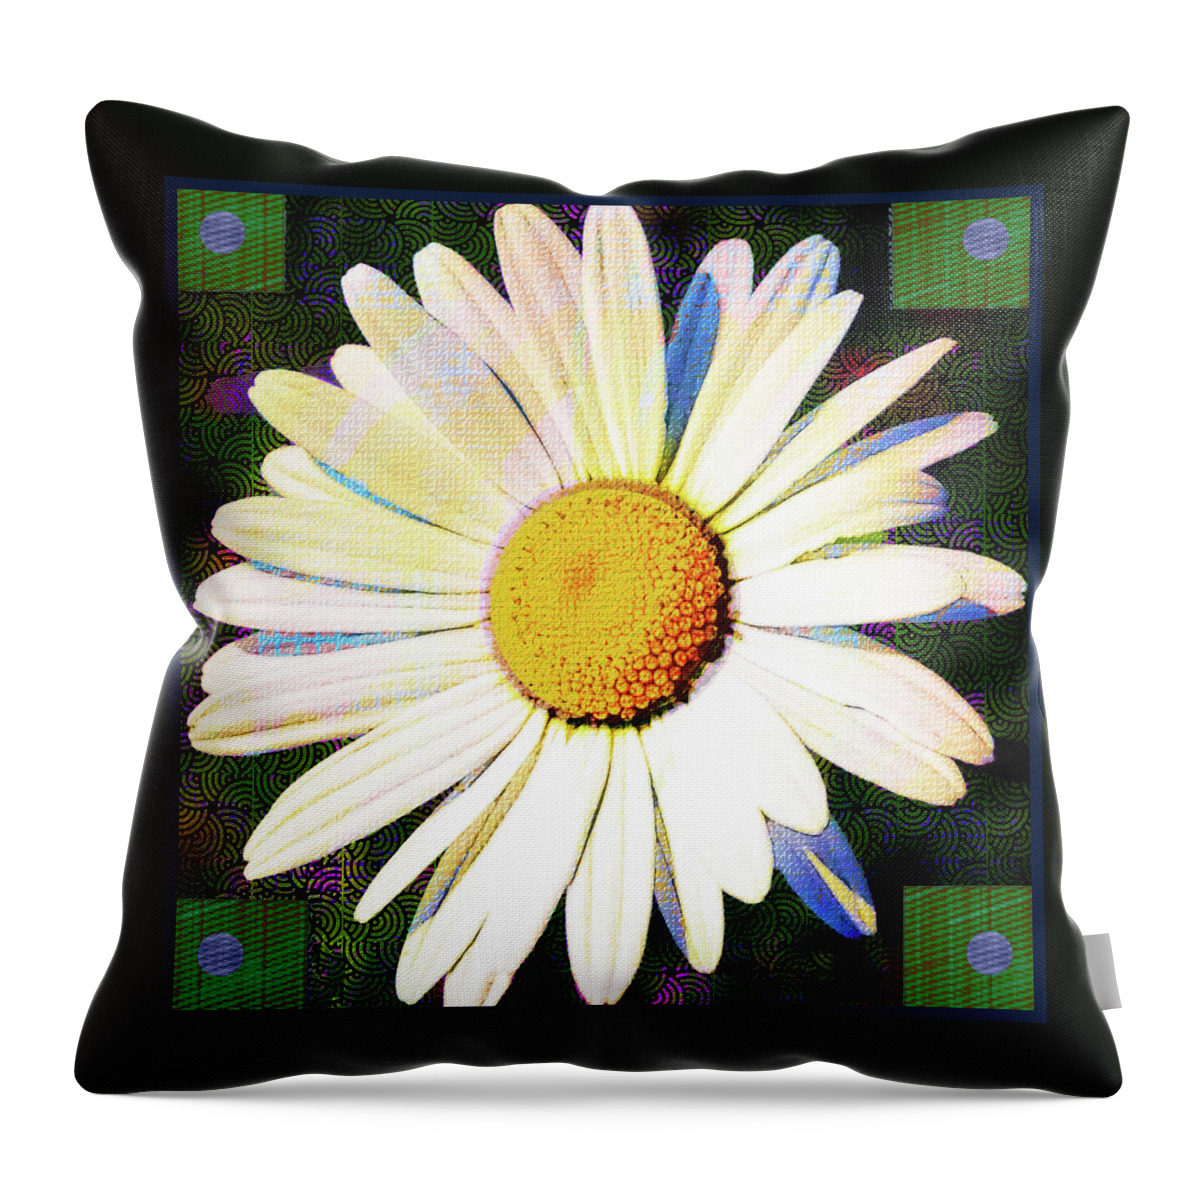 Flower Throw Pillow featuring the digital art White Daisy Bud by Rod Whyte